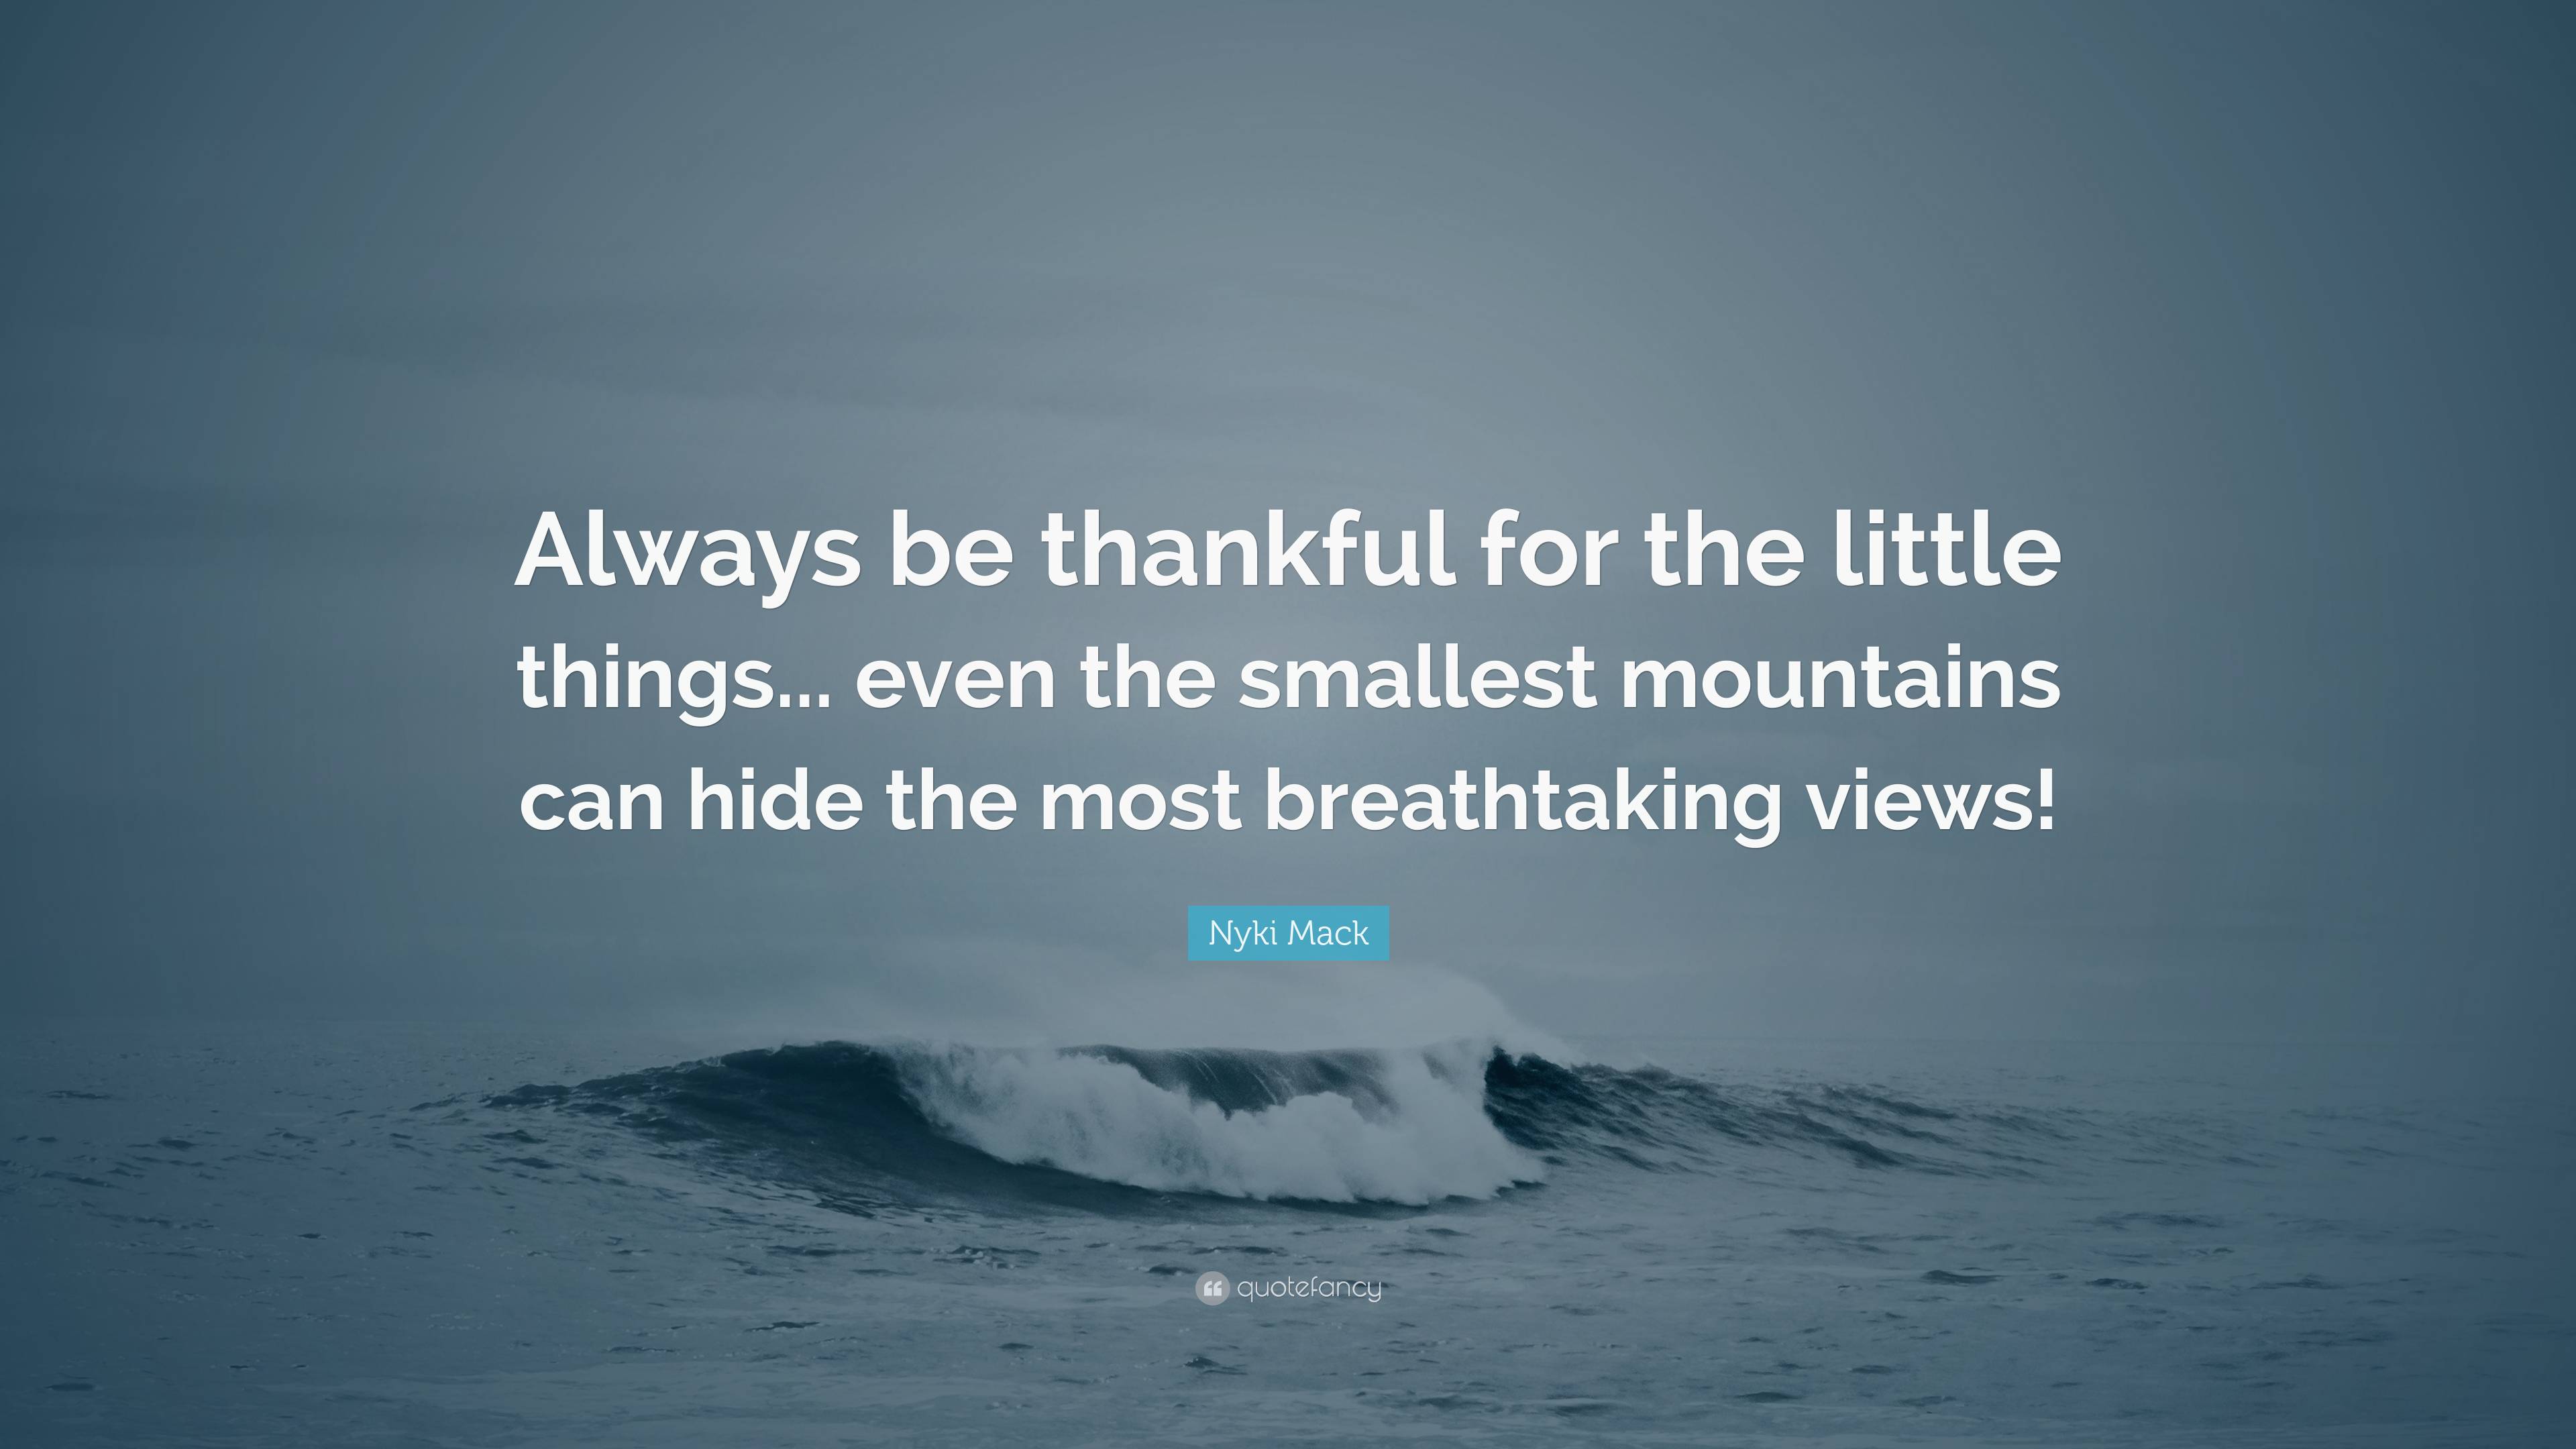 Be Grateful - Even for the Small Things